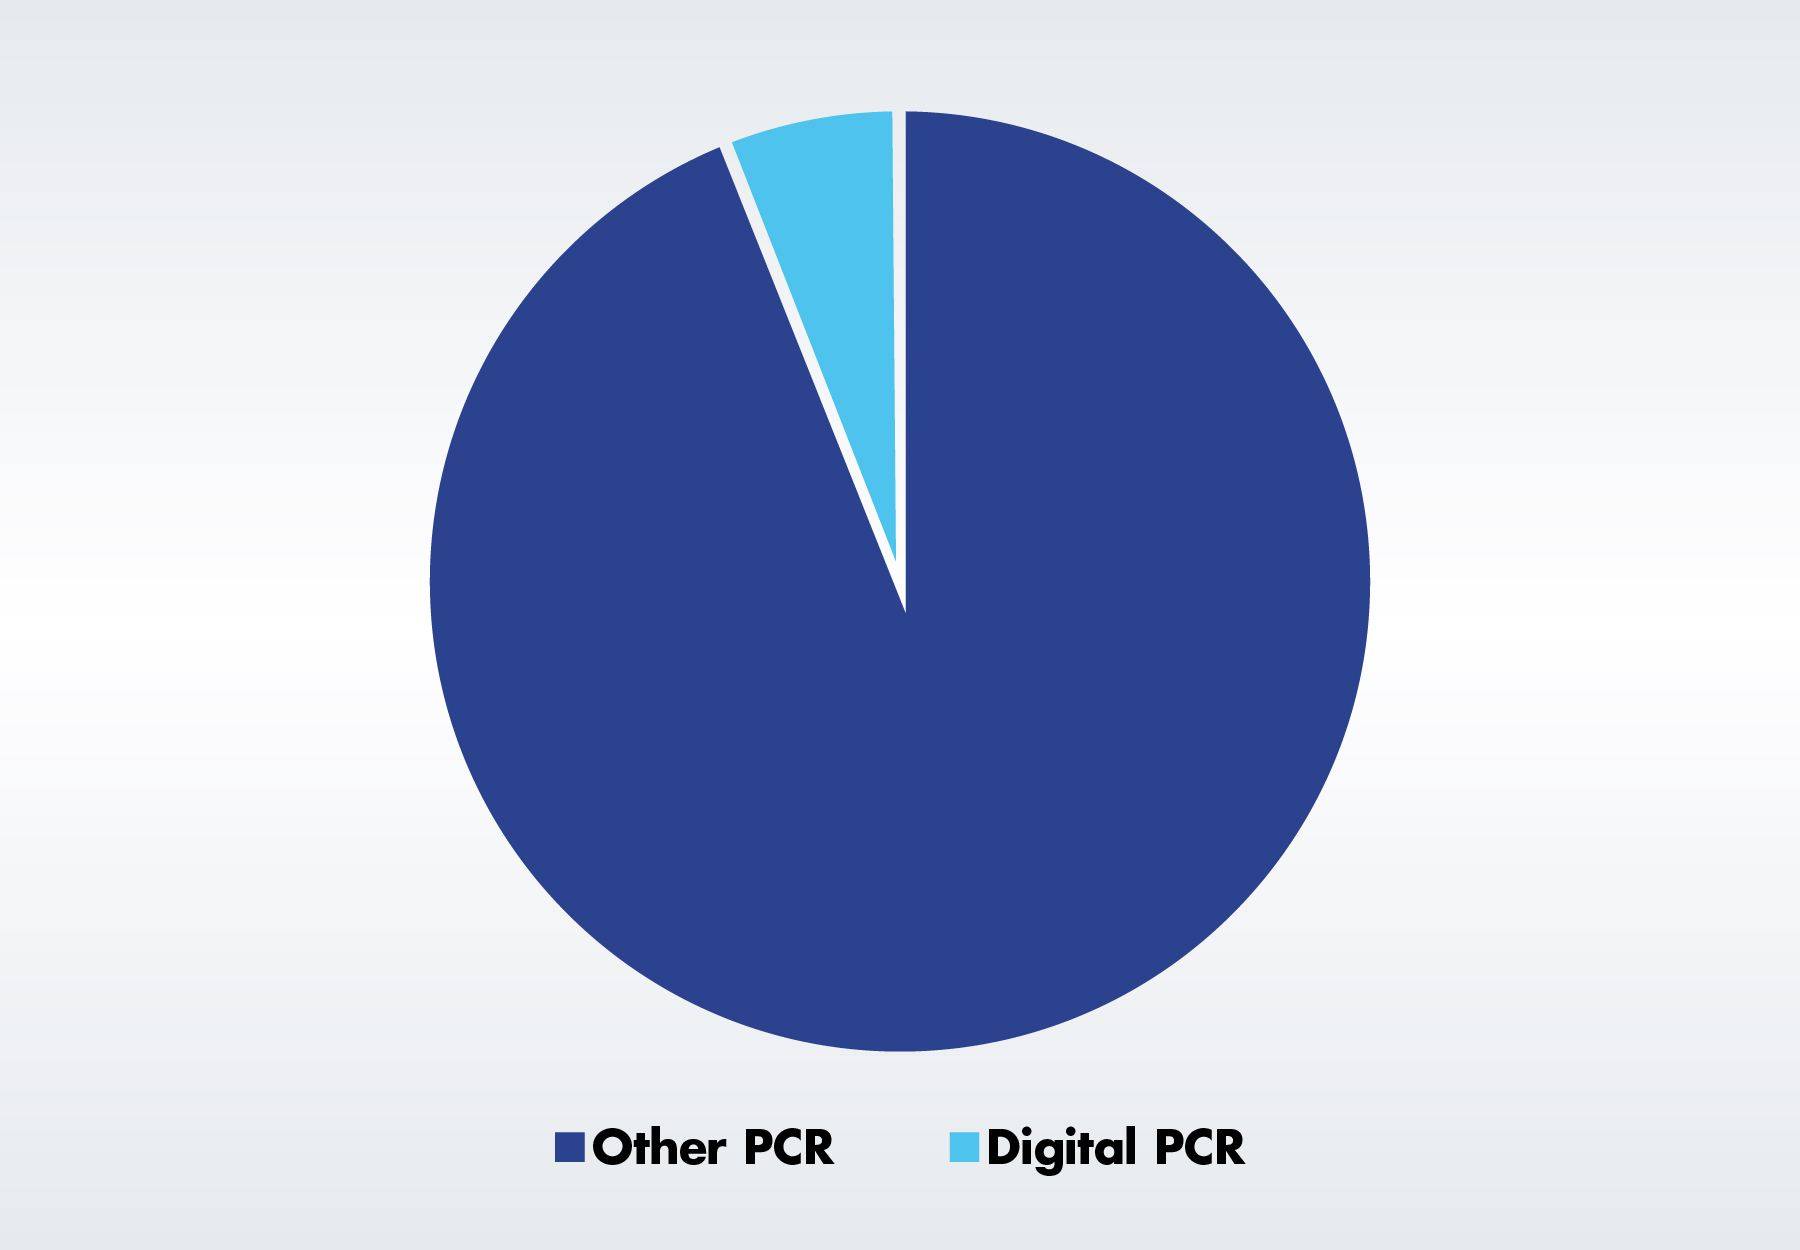 Pie chart with a small section in light blue showing digital PCR and large section in dark blue showing other PCR technologies.